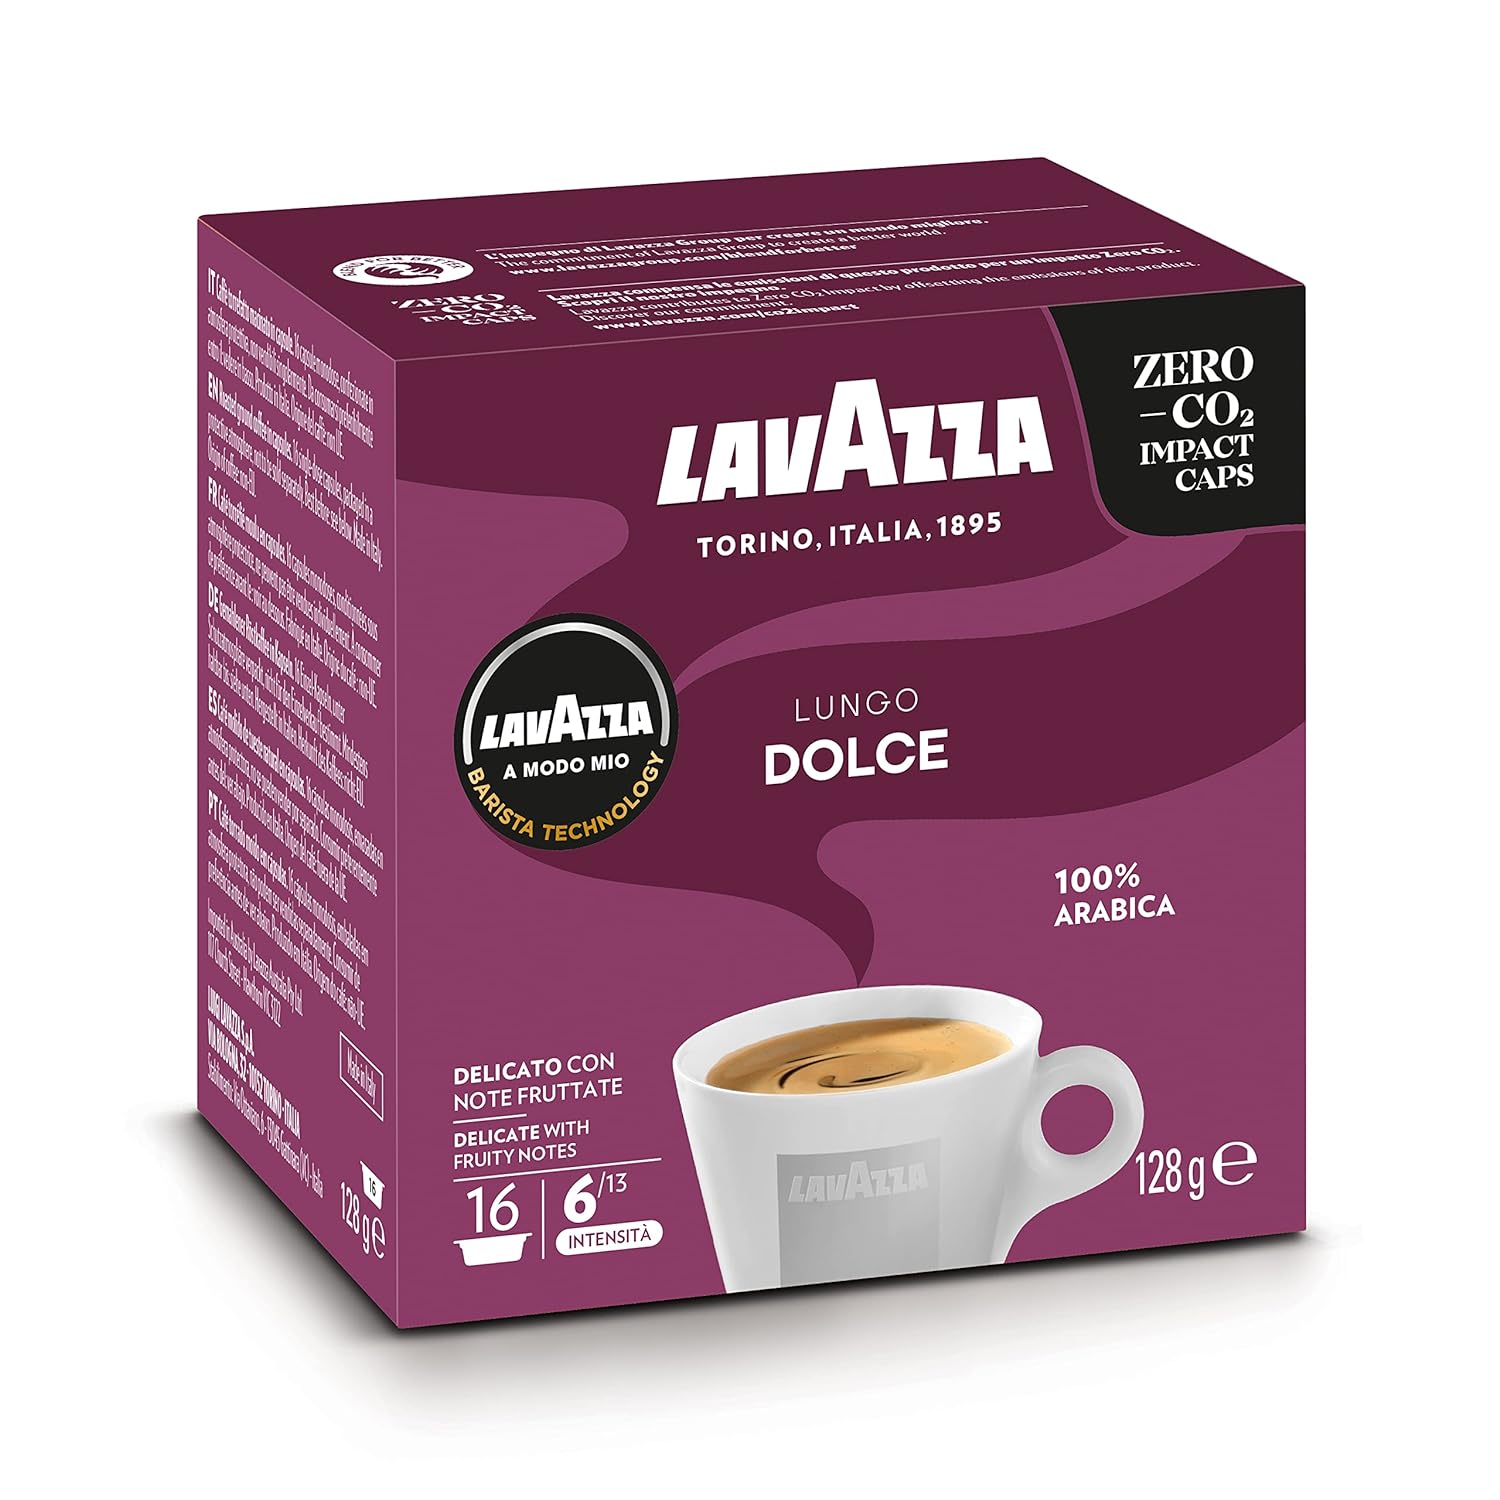 Lavazza, A Modo Mio Lungo Dolce 1 Pack of 16 Coffee Capsules with Dried Fruit Flavors 100% Arabica Intensity 6/13 Medium Roast